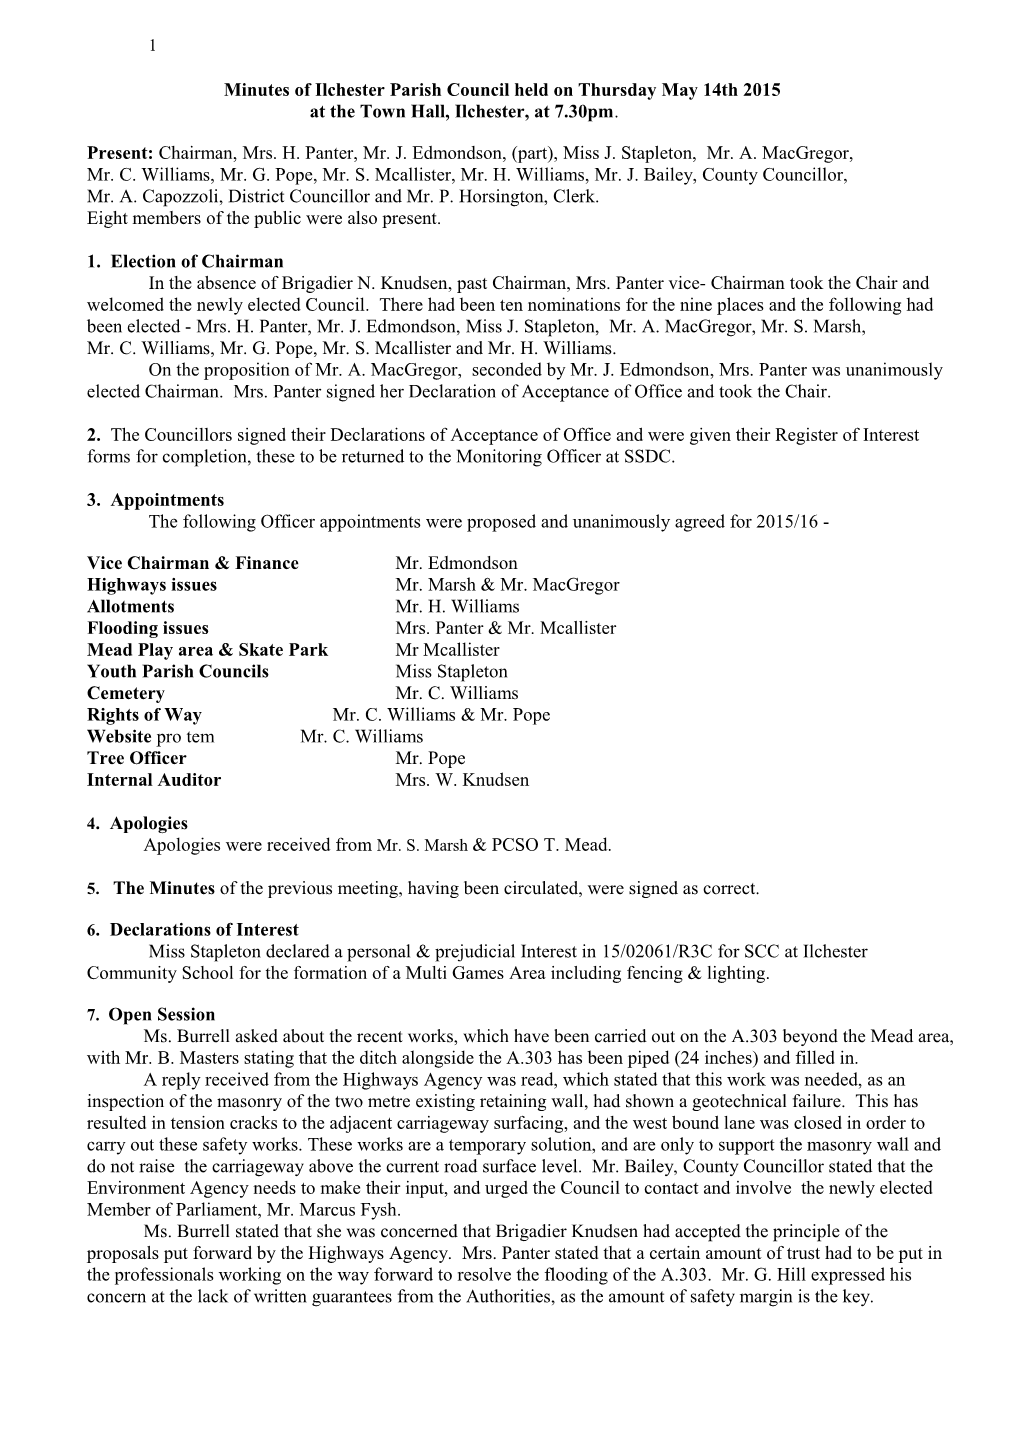 Minutes of Ilchester Parish Council Held on Thursdaymay 14Th 2015